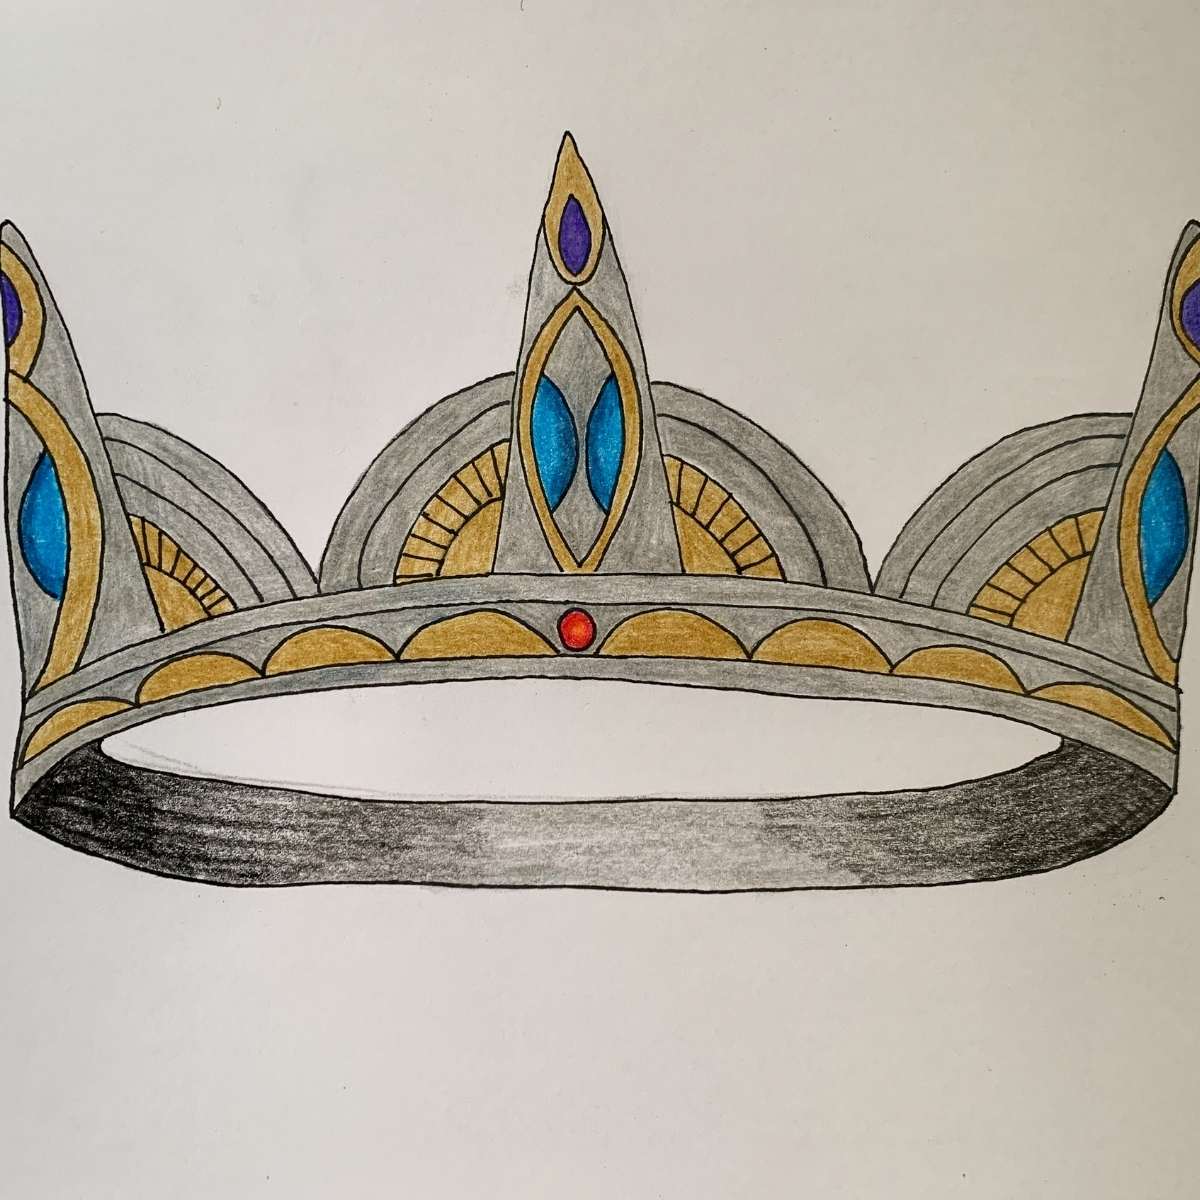 How to color a crown